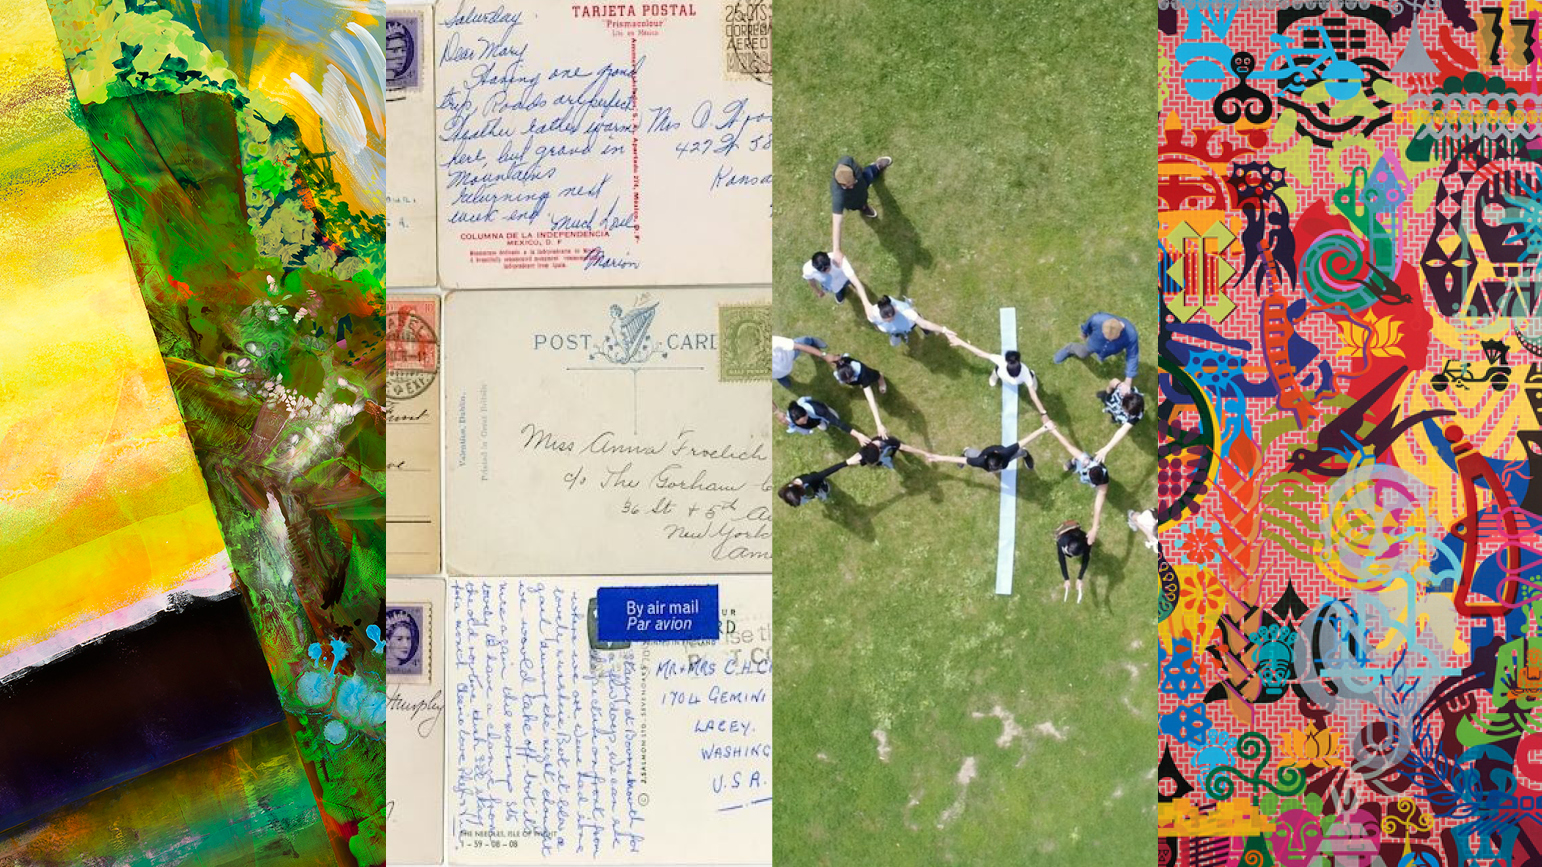 Four images: 1: abstract painting in primarily yellow and green; 2: several old postcards; 3; a group of people holding hands photographed on a lawn from above; 4: abstract painting with bright colors with many overlapping symbols